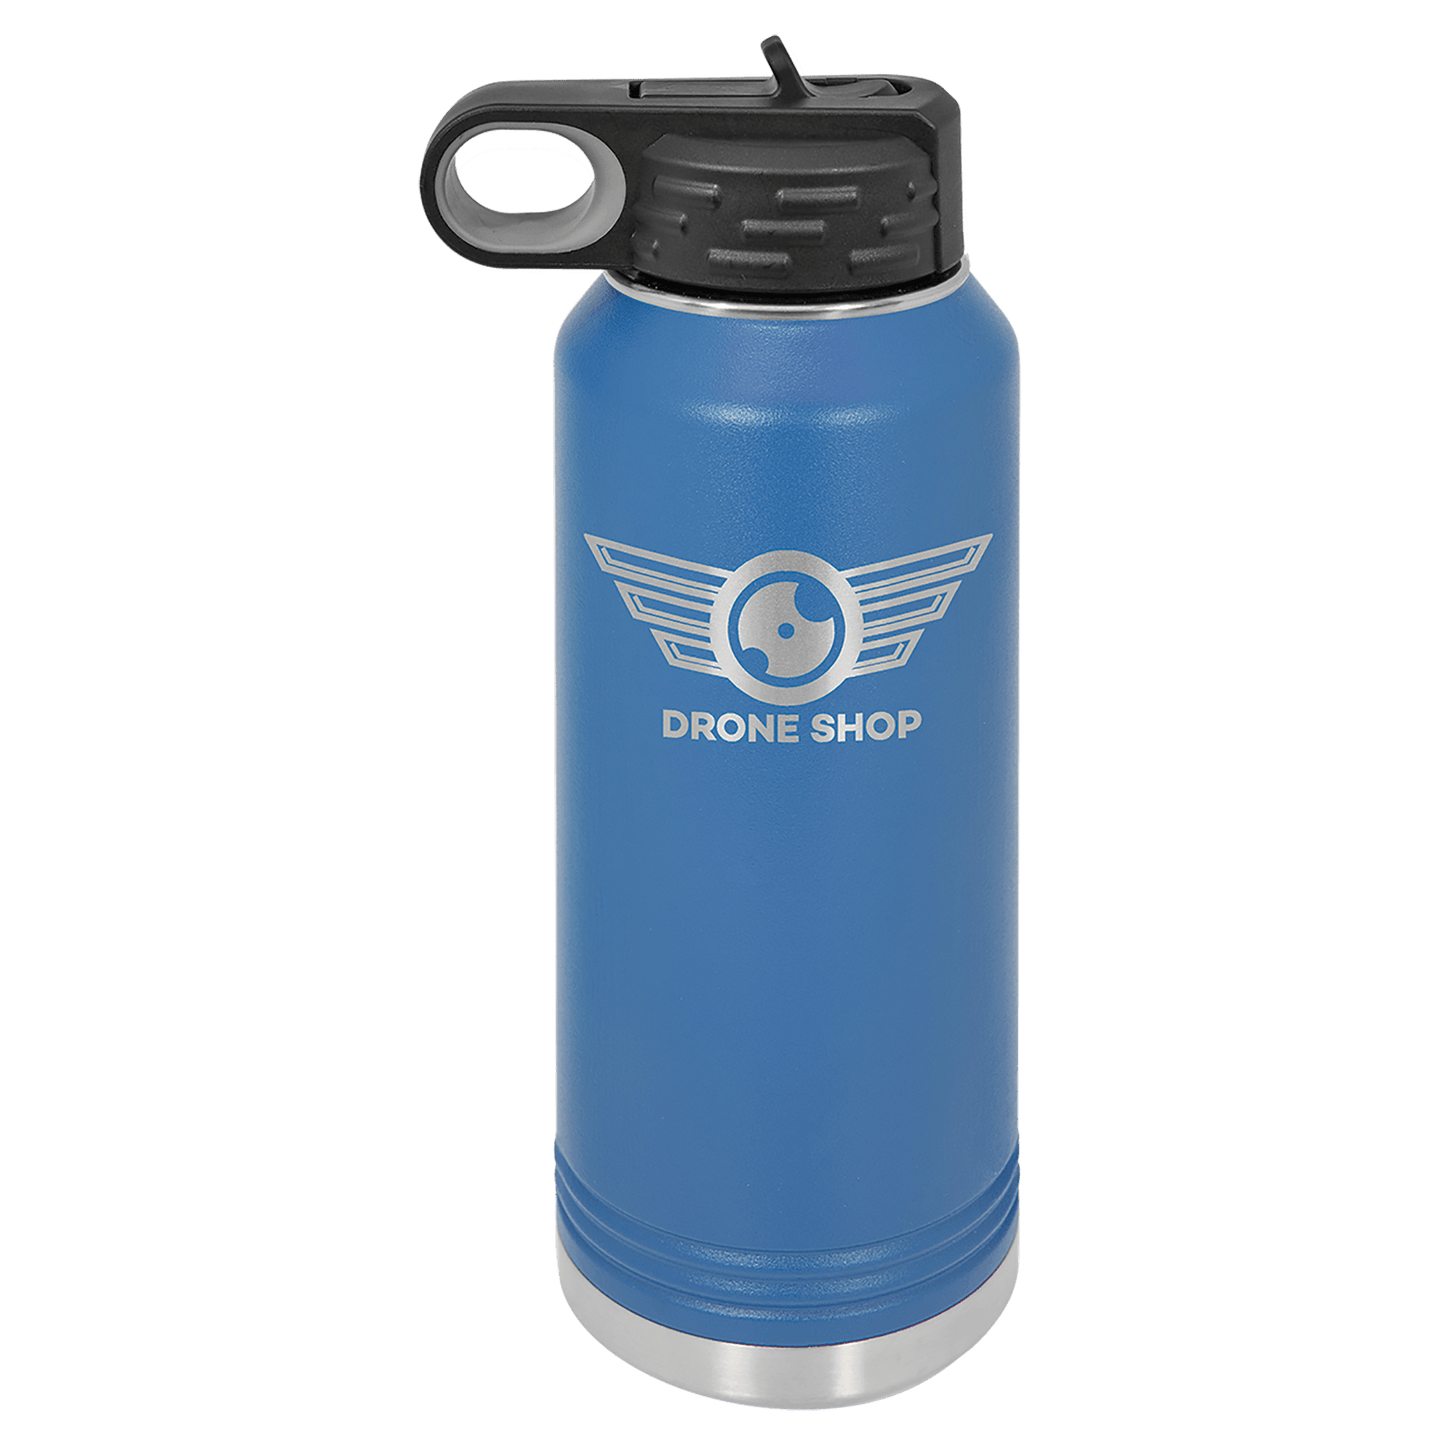 Laser Engraved Insulated Water Bottle 32 oz